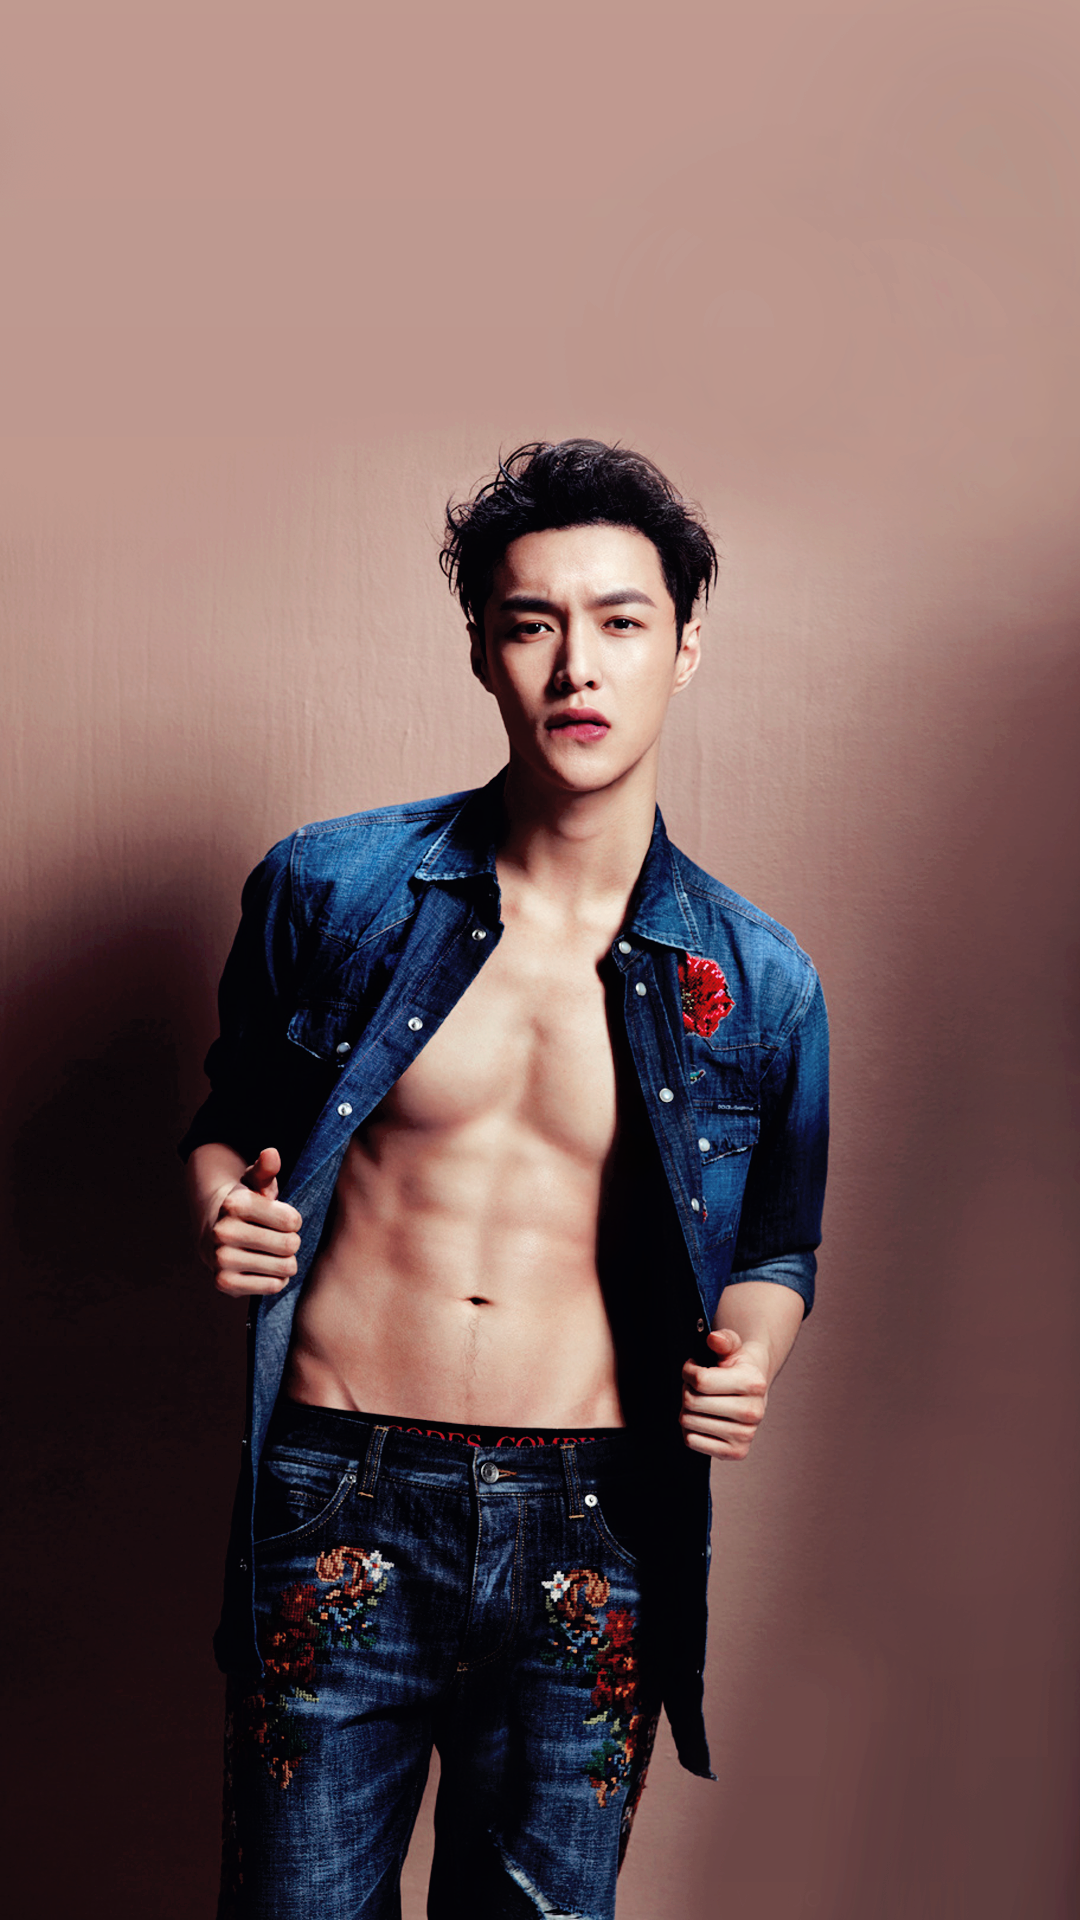 lay wallpaper,barechested,jeans,muscle,chest,model